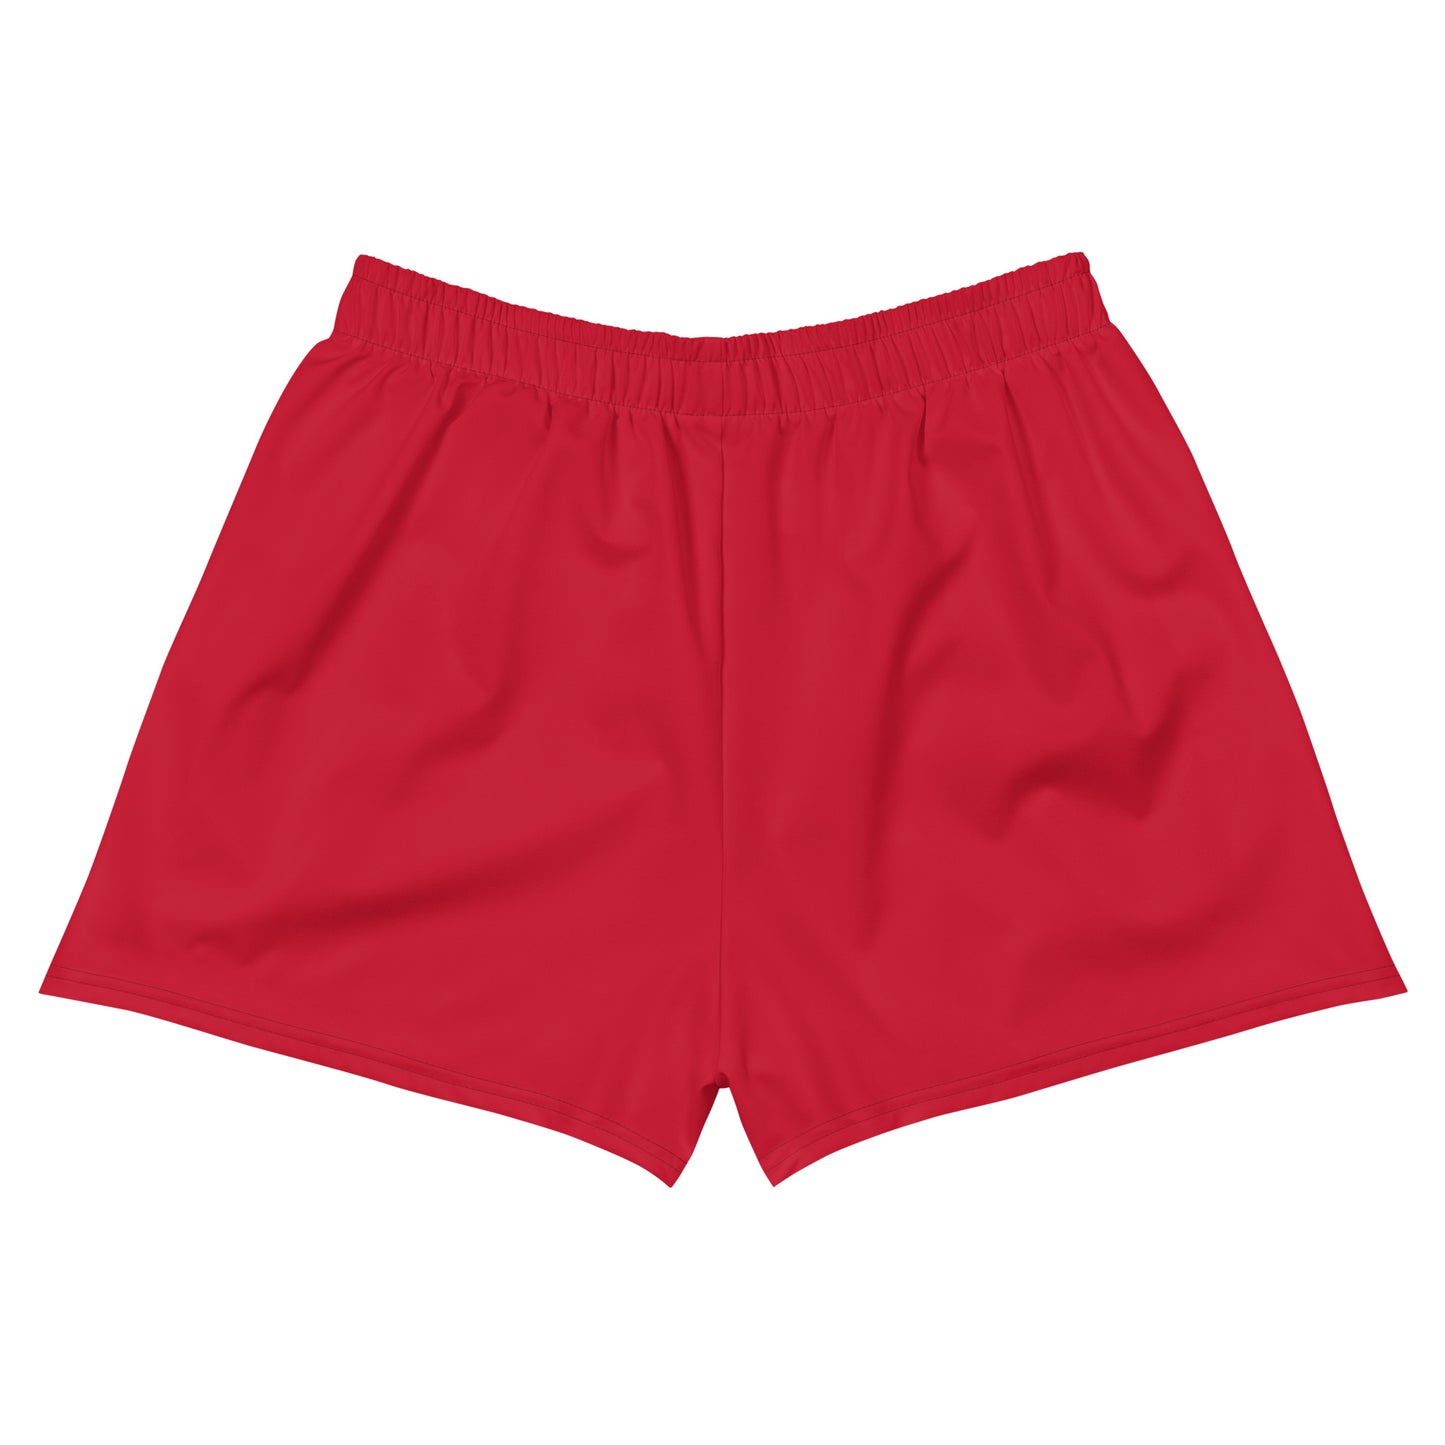 Red Athletic Shorts